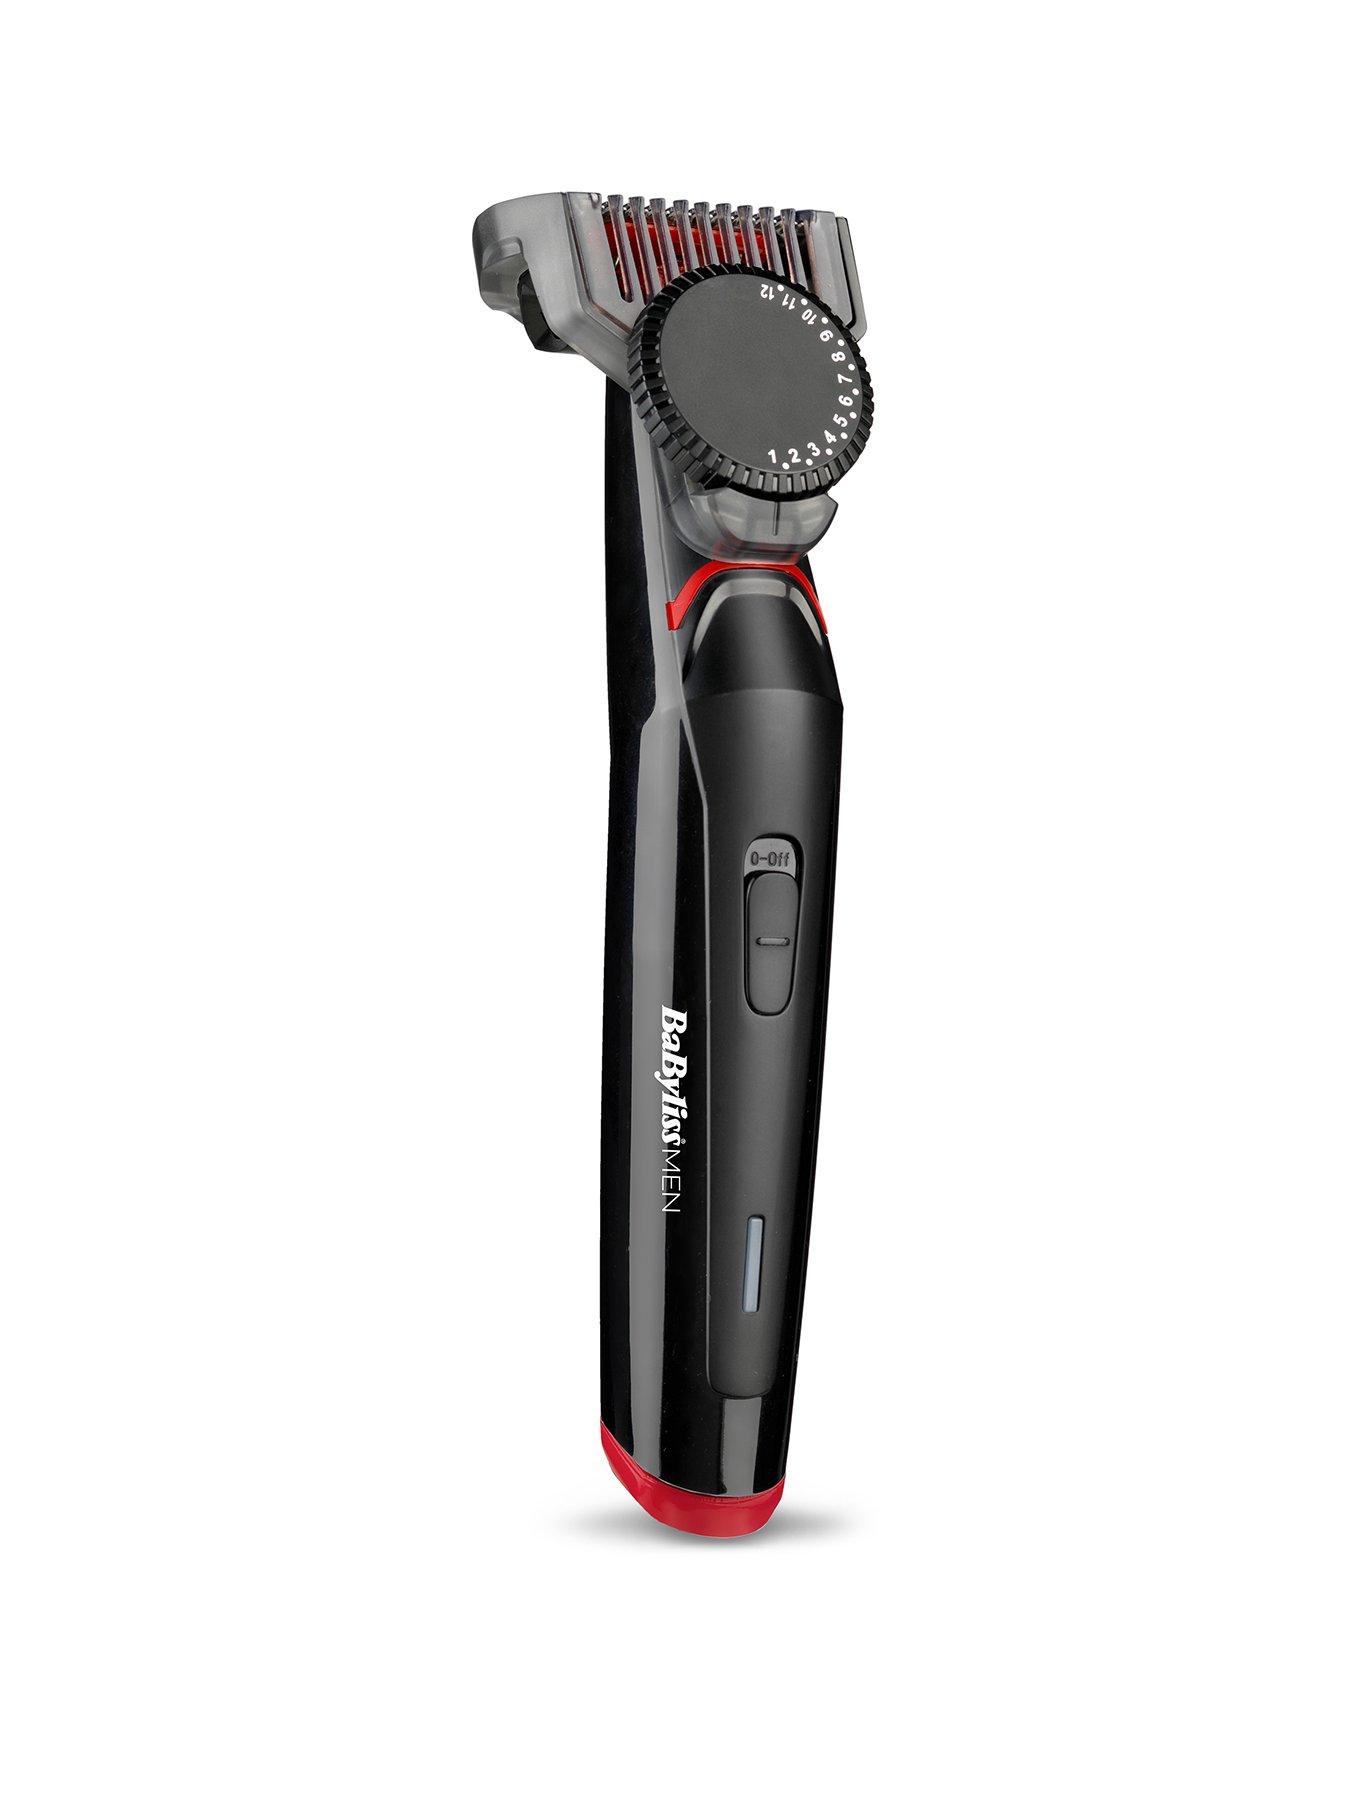 boots hair trimmer mens